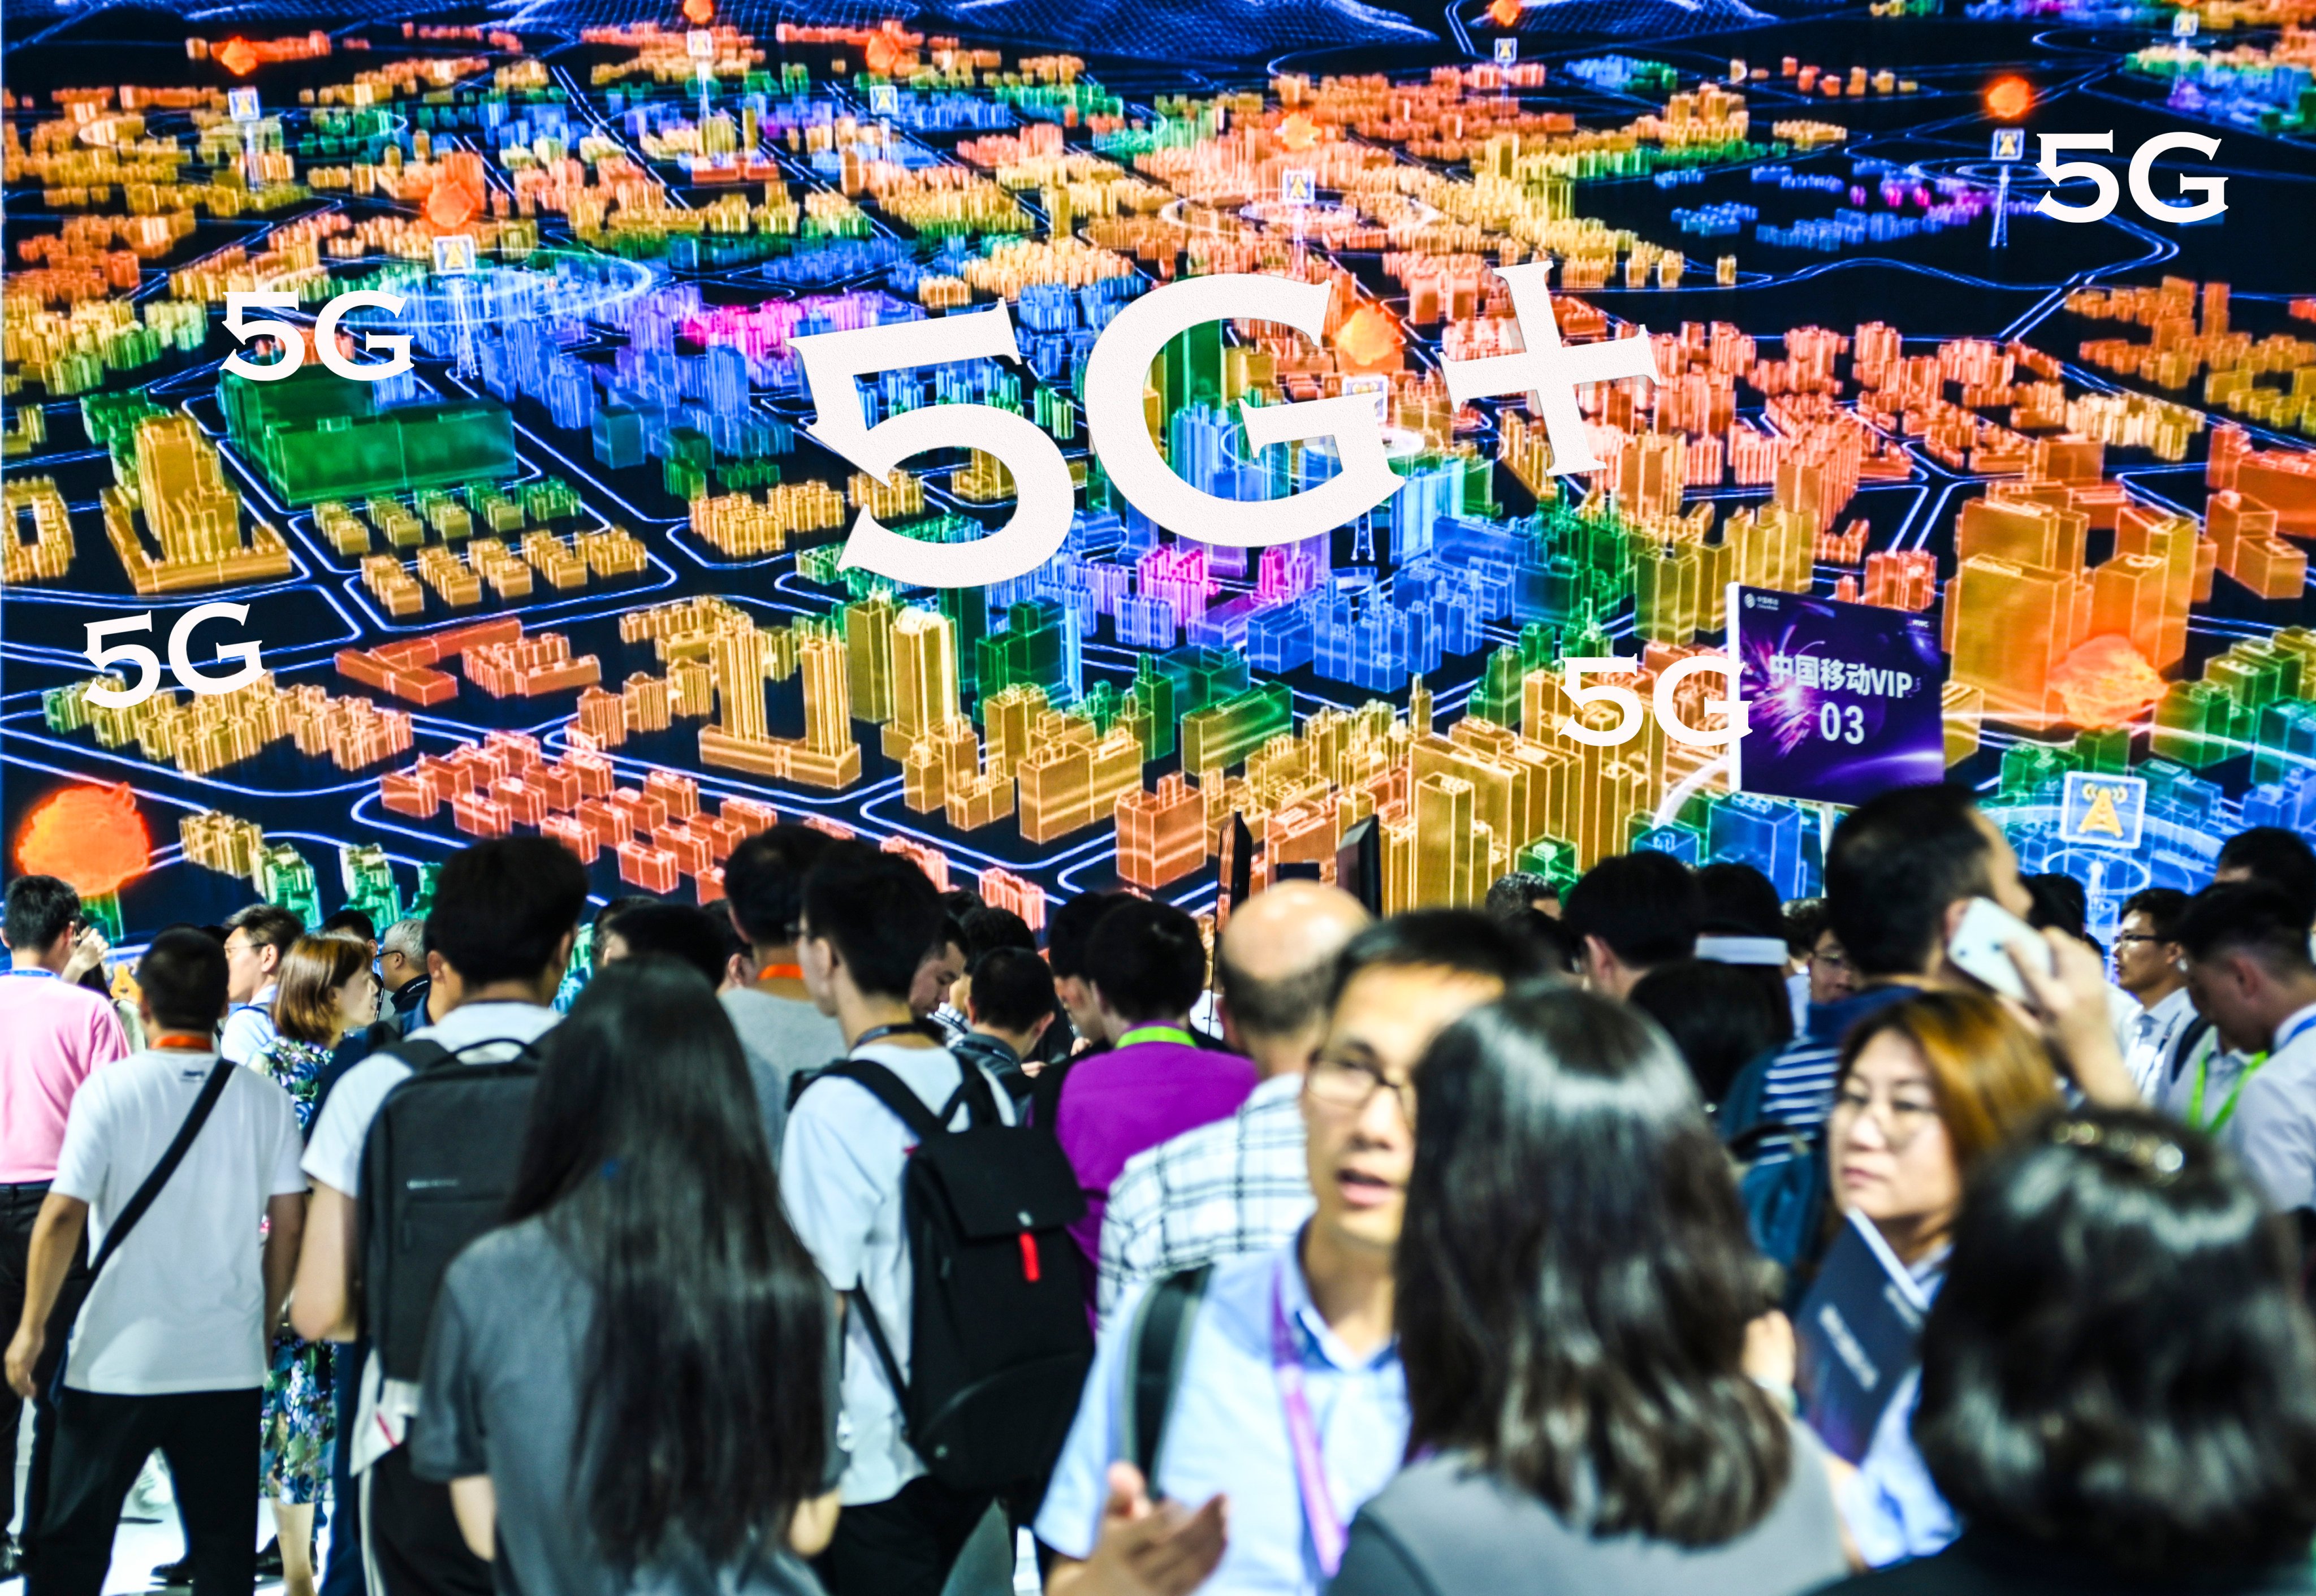 MWC Shanghai, shown here in June 2019, returns this month with a sharpened focus on 5G transformation in China, the telecommunications industry’s largest 5G market. Photo: Visual China Group via Getty Images